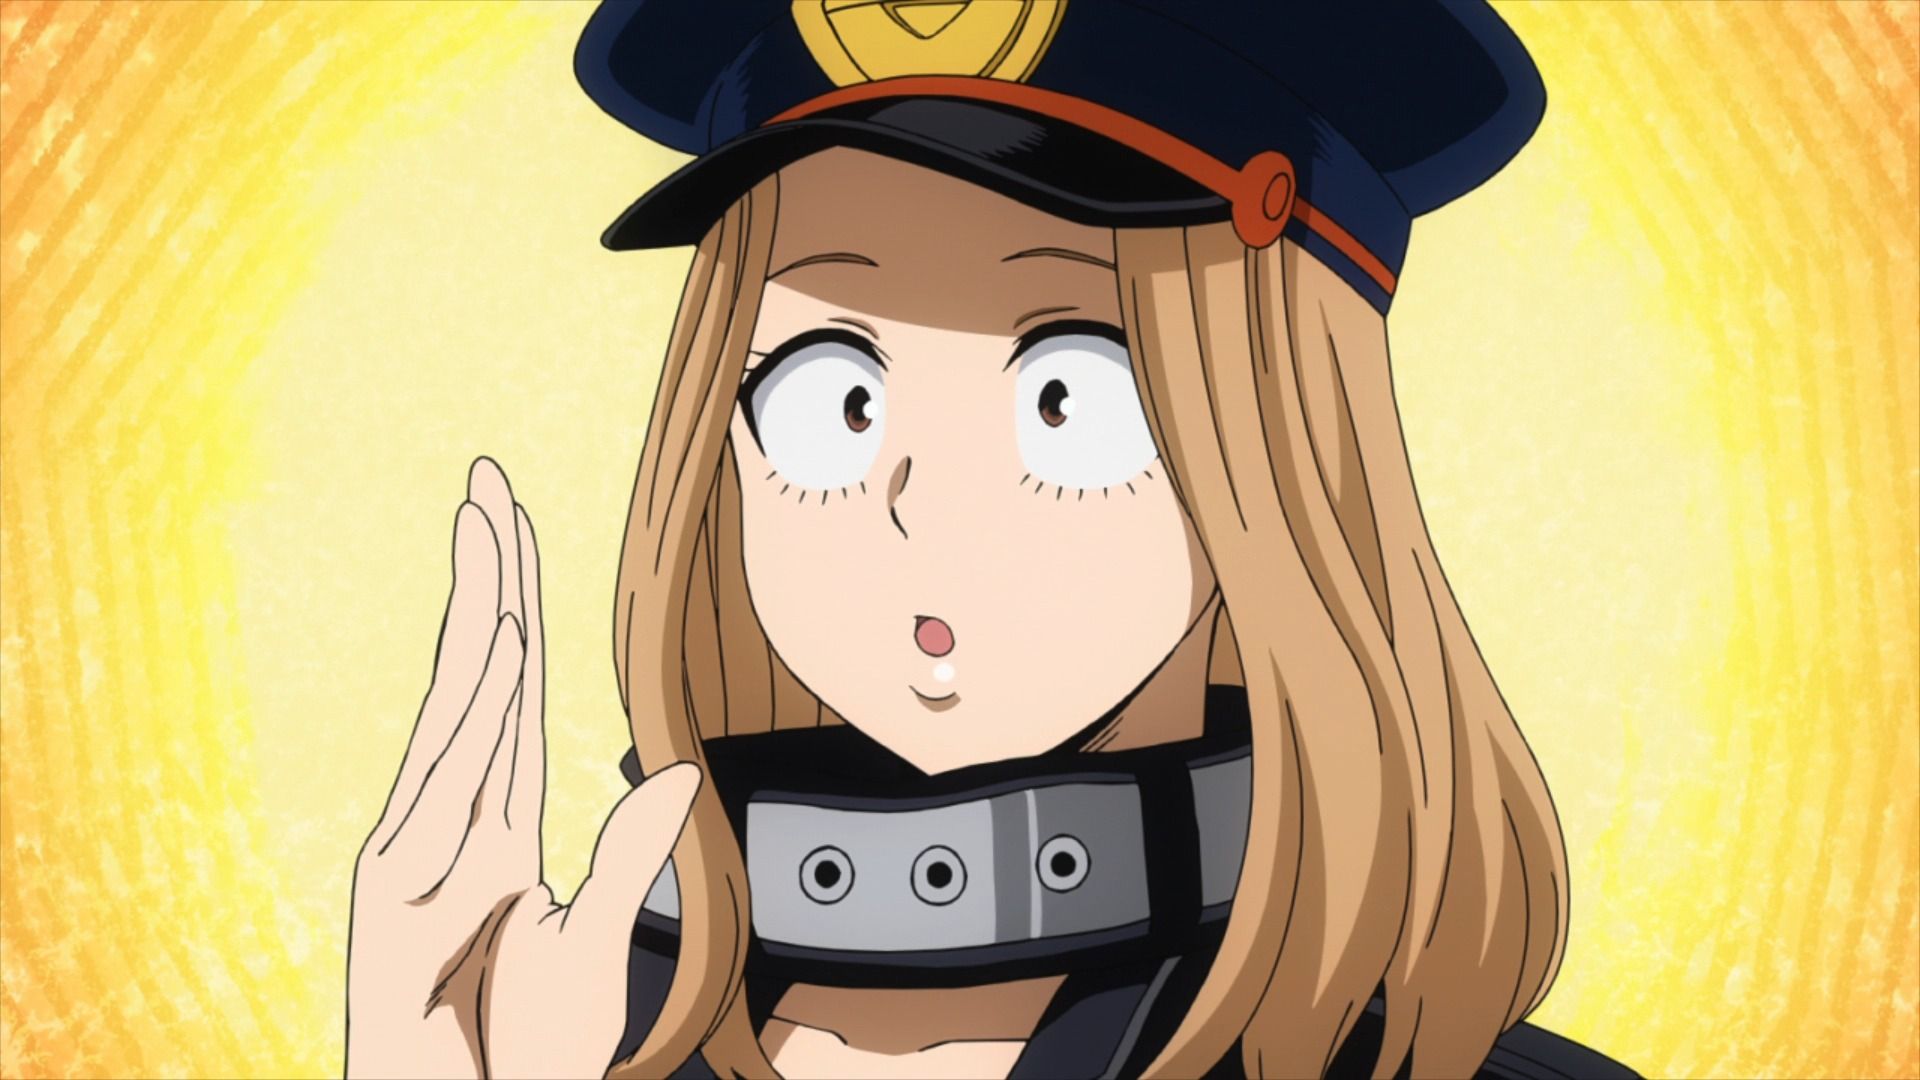 Reference Emporium sheet and screenshots of Camie Utsushimi from My Hero Academia. Albums or